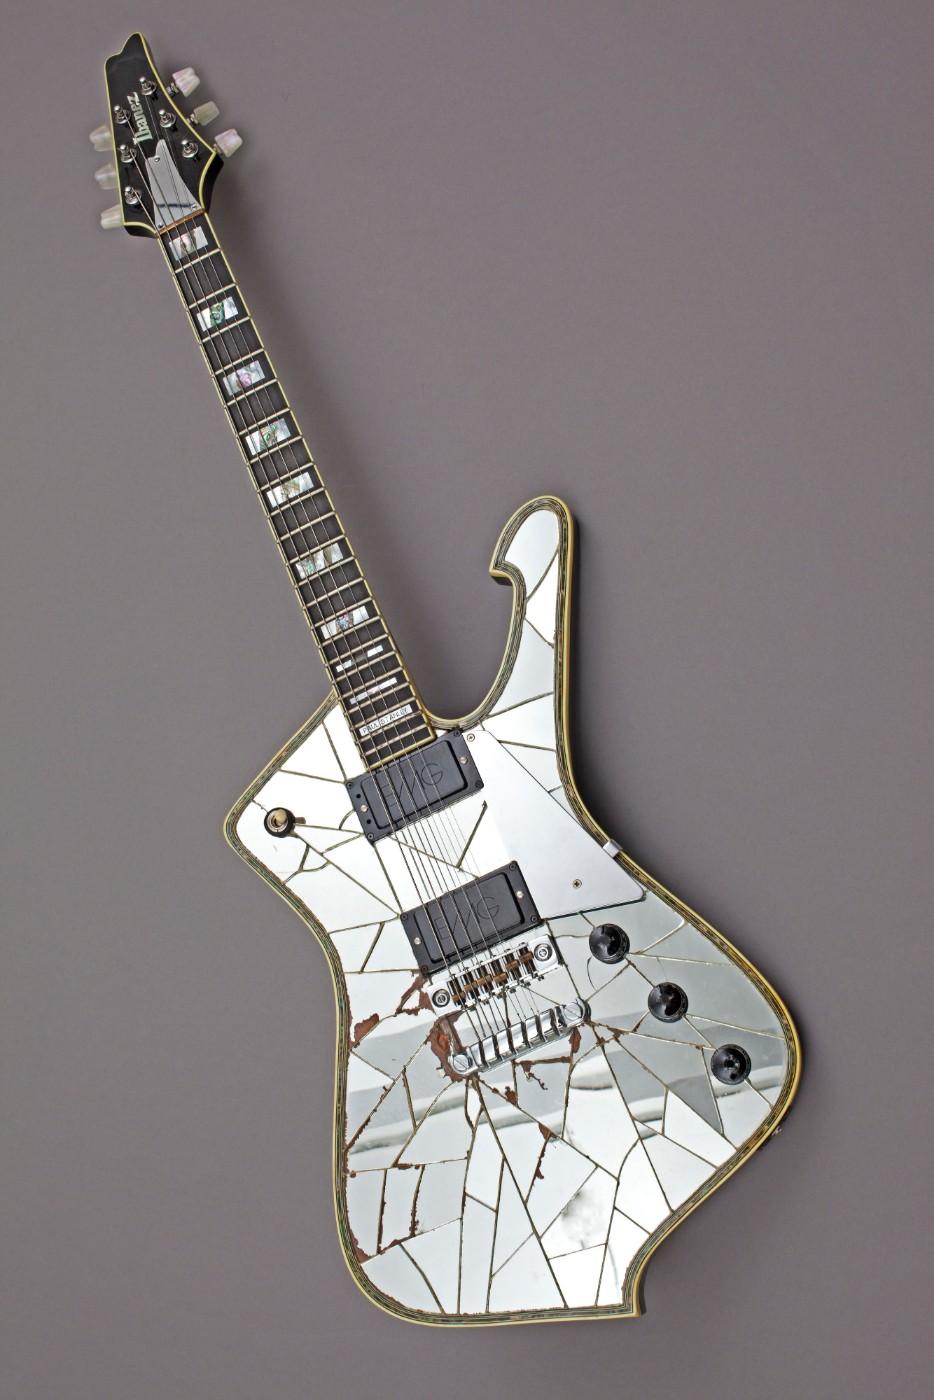 Paul Stanley of KISS collaborated with Jeff Hasselberger of Ibanez to create this guitar. Stanley used in live performances with KISS in 1979-80 and again in 1996-97.